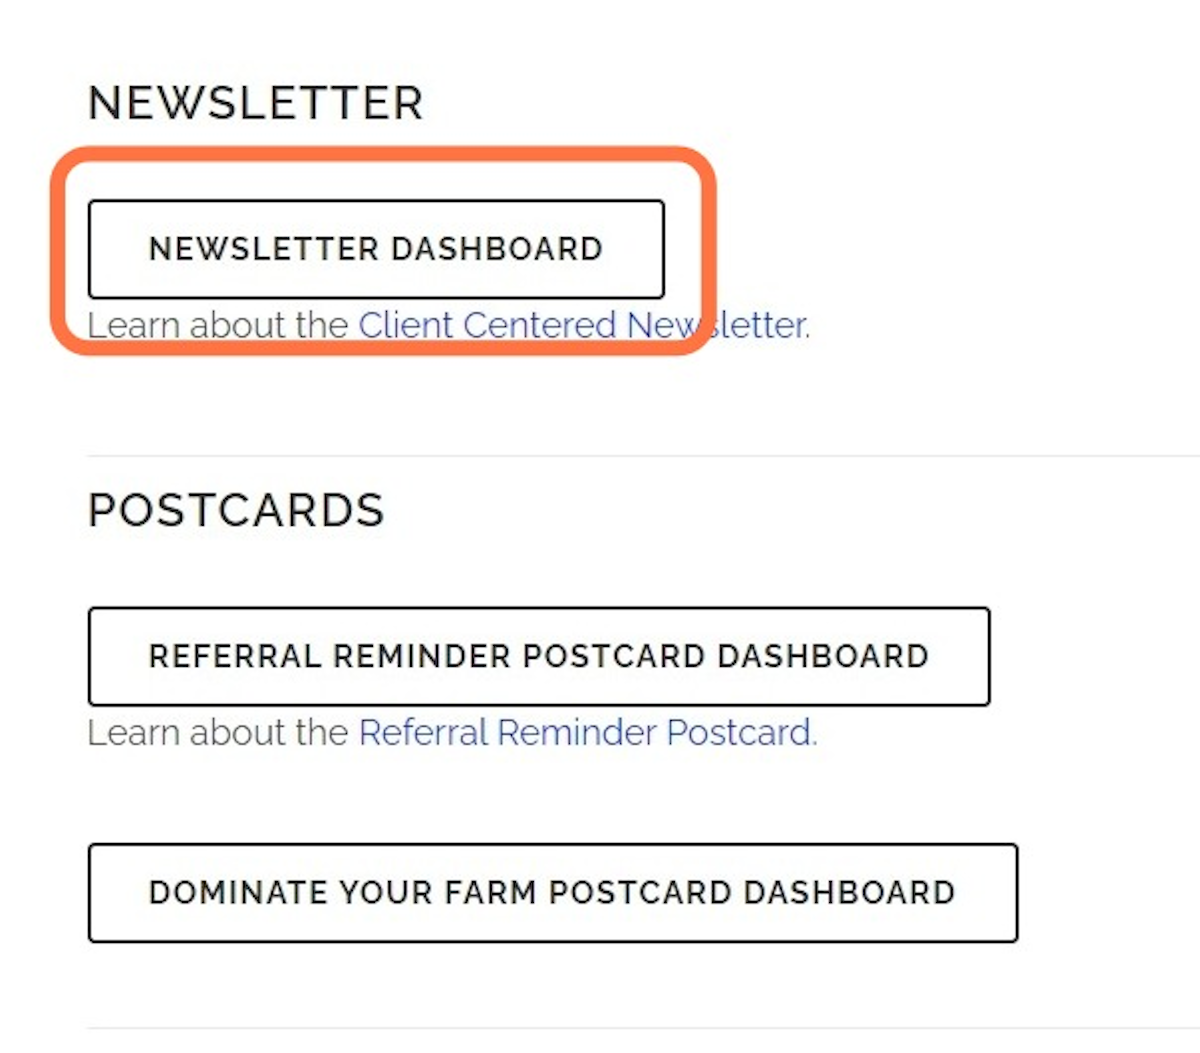 Click on Newsletter Dashboard